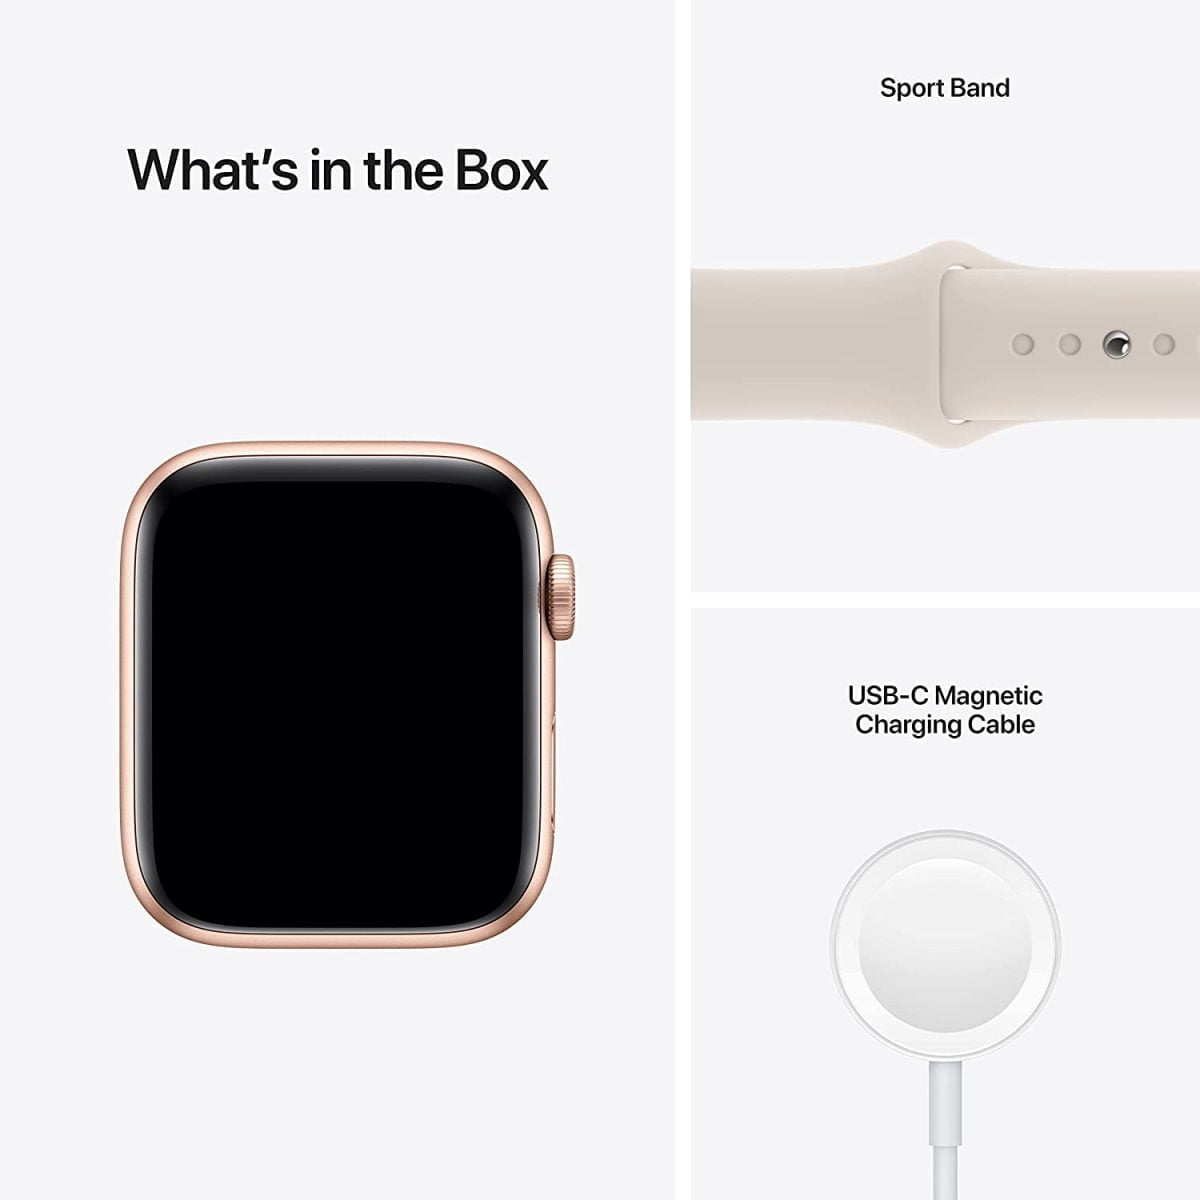 61Ywbt42Obl. Ac Sl1500 Apple &Lt;H1&Gt;Apple Watch Se (Gps) 44Mm Gold Aluminum Case With Starlight Sport Band - Gold&Lt;/H1&Gt; &Lt;Span Style=&Quot;Color: #333333;Font-Size: 16Px&Quot;&Gt;With Powerful Features To Help Keep You Connected, Active, Healthy, And Safe, Apple Watch Se Is A Lot Of Watch. For A Lot Less Than You Expected.&Lt;/Span&Gt; Apple Watch Apple Watch Se (Gps) 44Mm Gold Aluminum Case With Starlight Sport Band - Gold